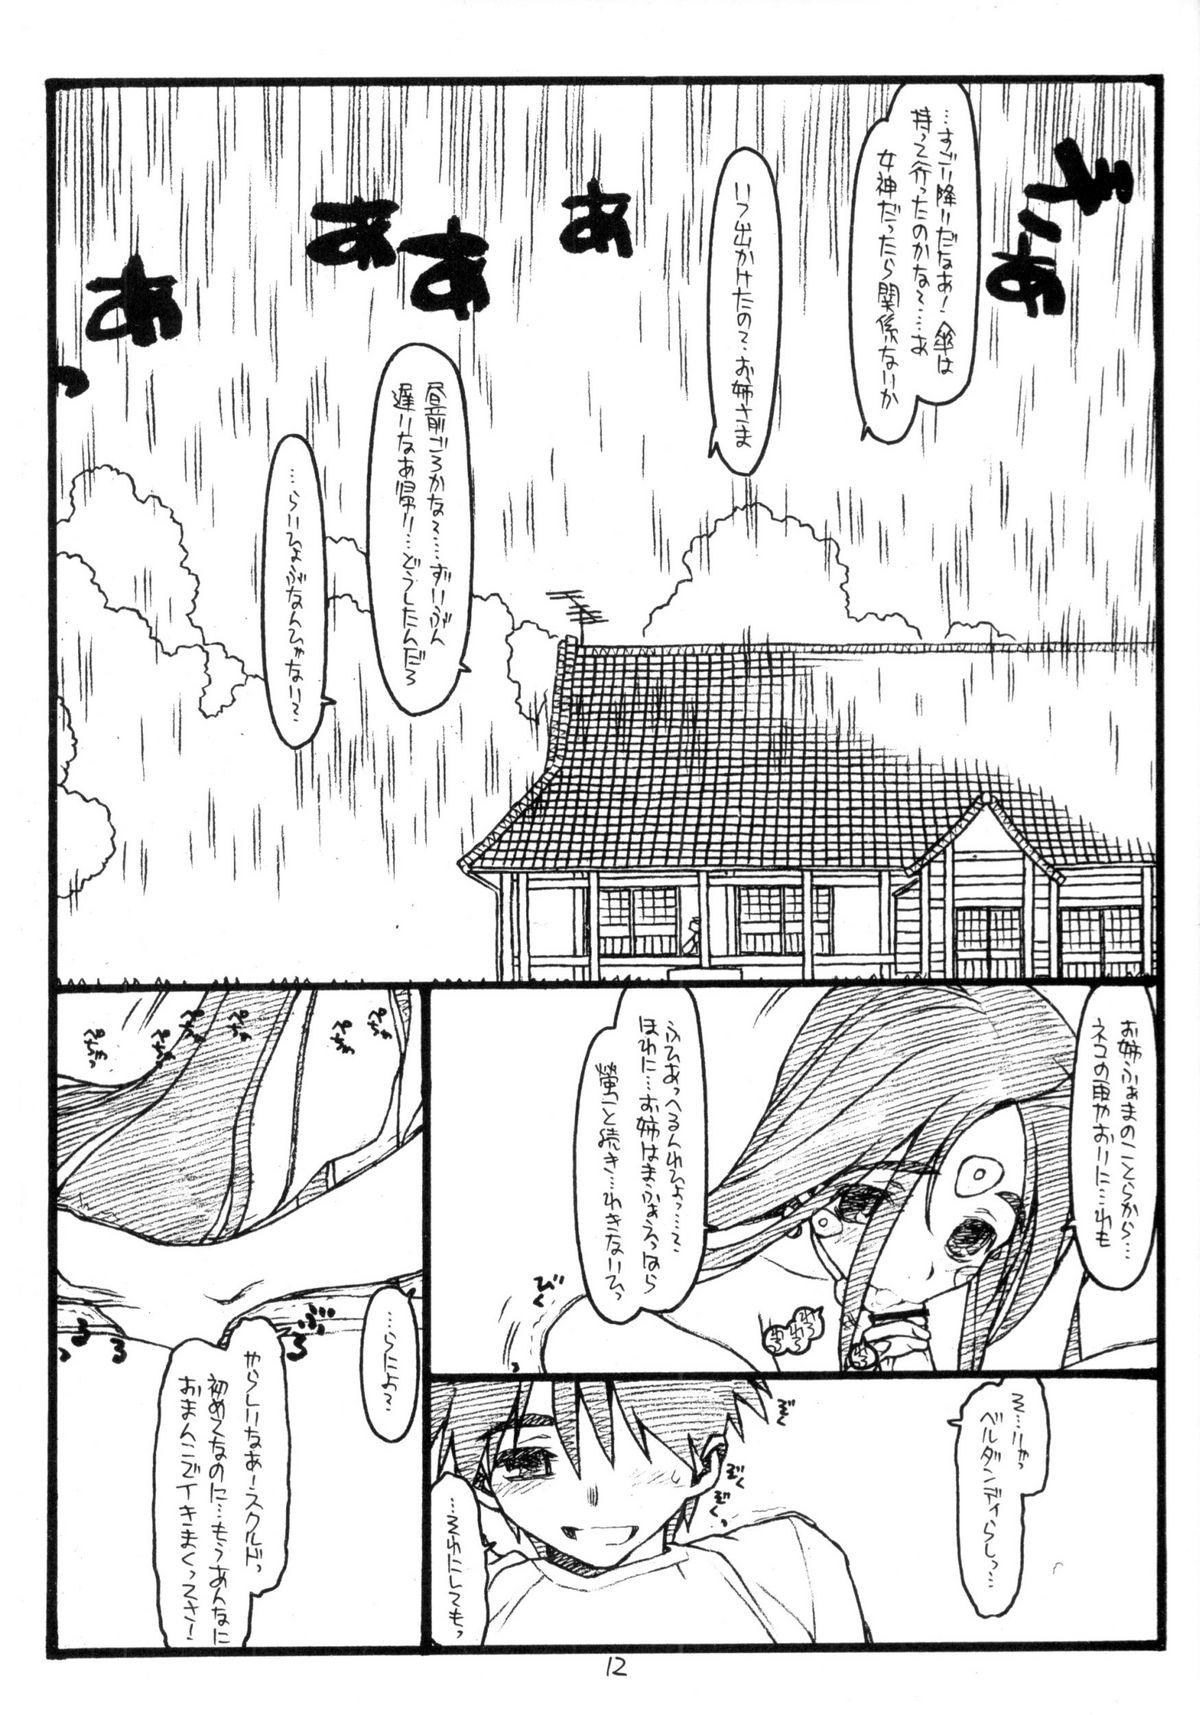 Rimming Oh My Sadness Episode #6.1 - Ah my goddess Sharing - Page 11